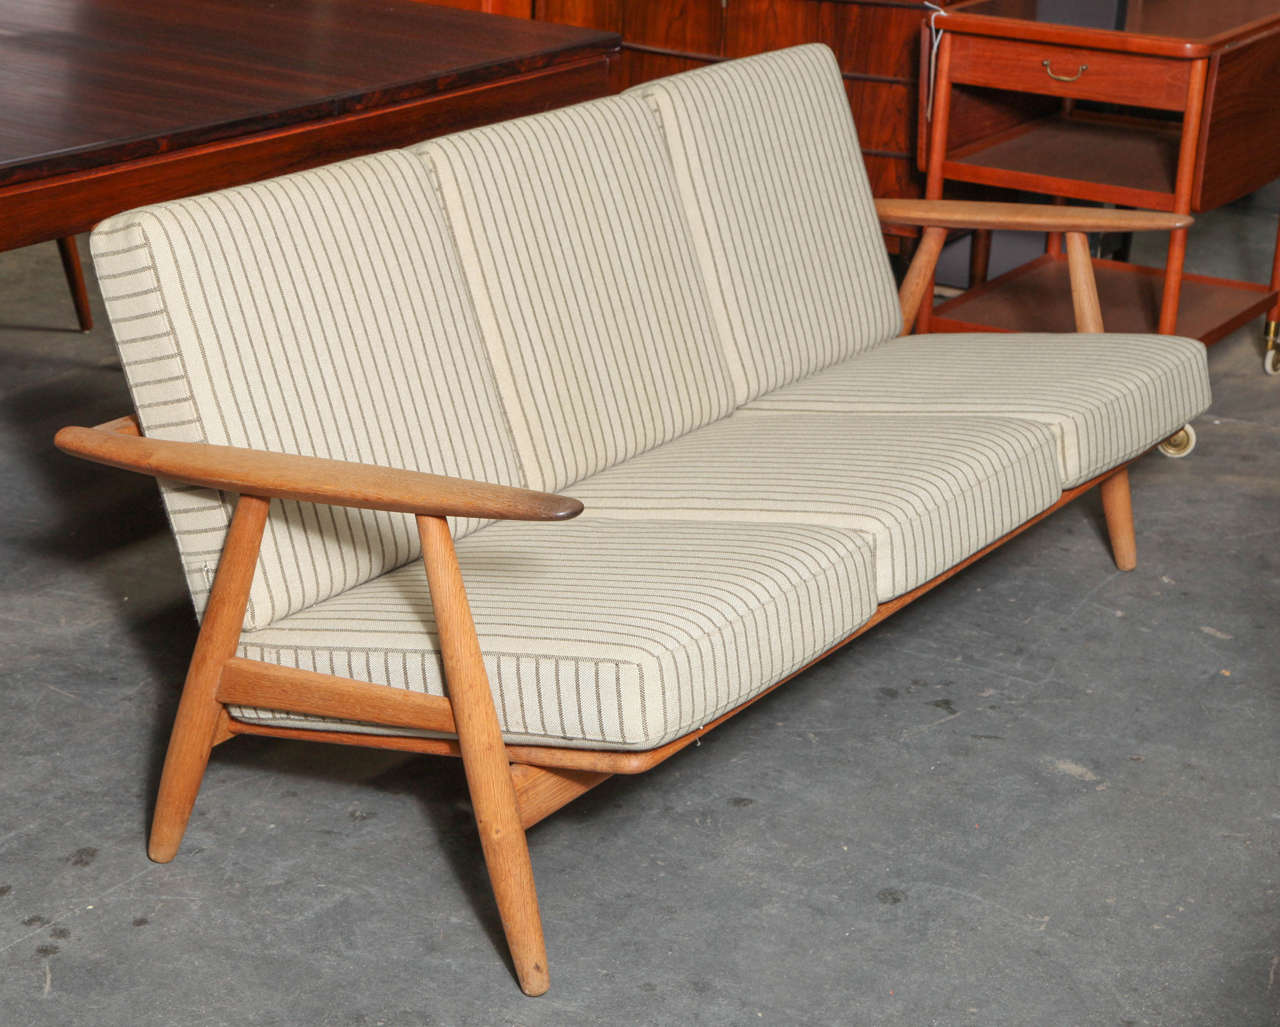 Vintage 1950s GETAMA Hans Wegner chair

This Danish sofa is in beautiful vintage condition. The oak is slightly aged and the spring cushions are in like-new condition. All original. Ready for pick up, delivery, or shipping.

Please contact us